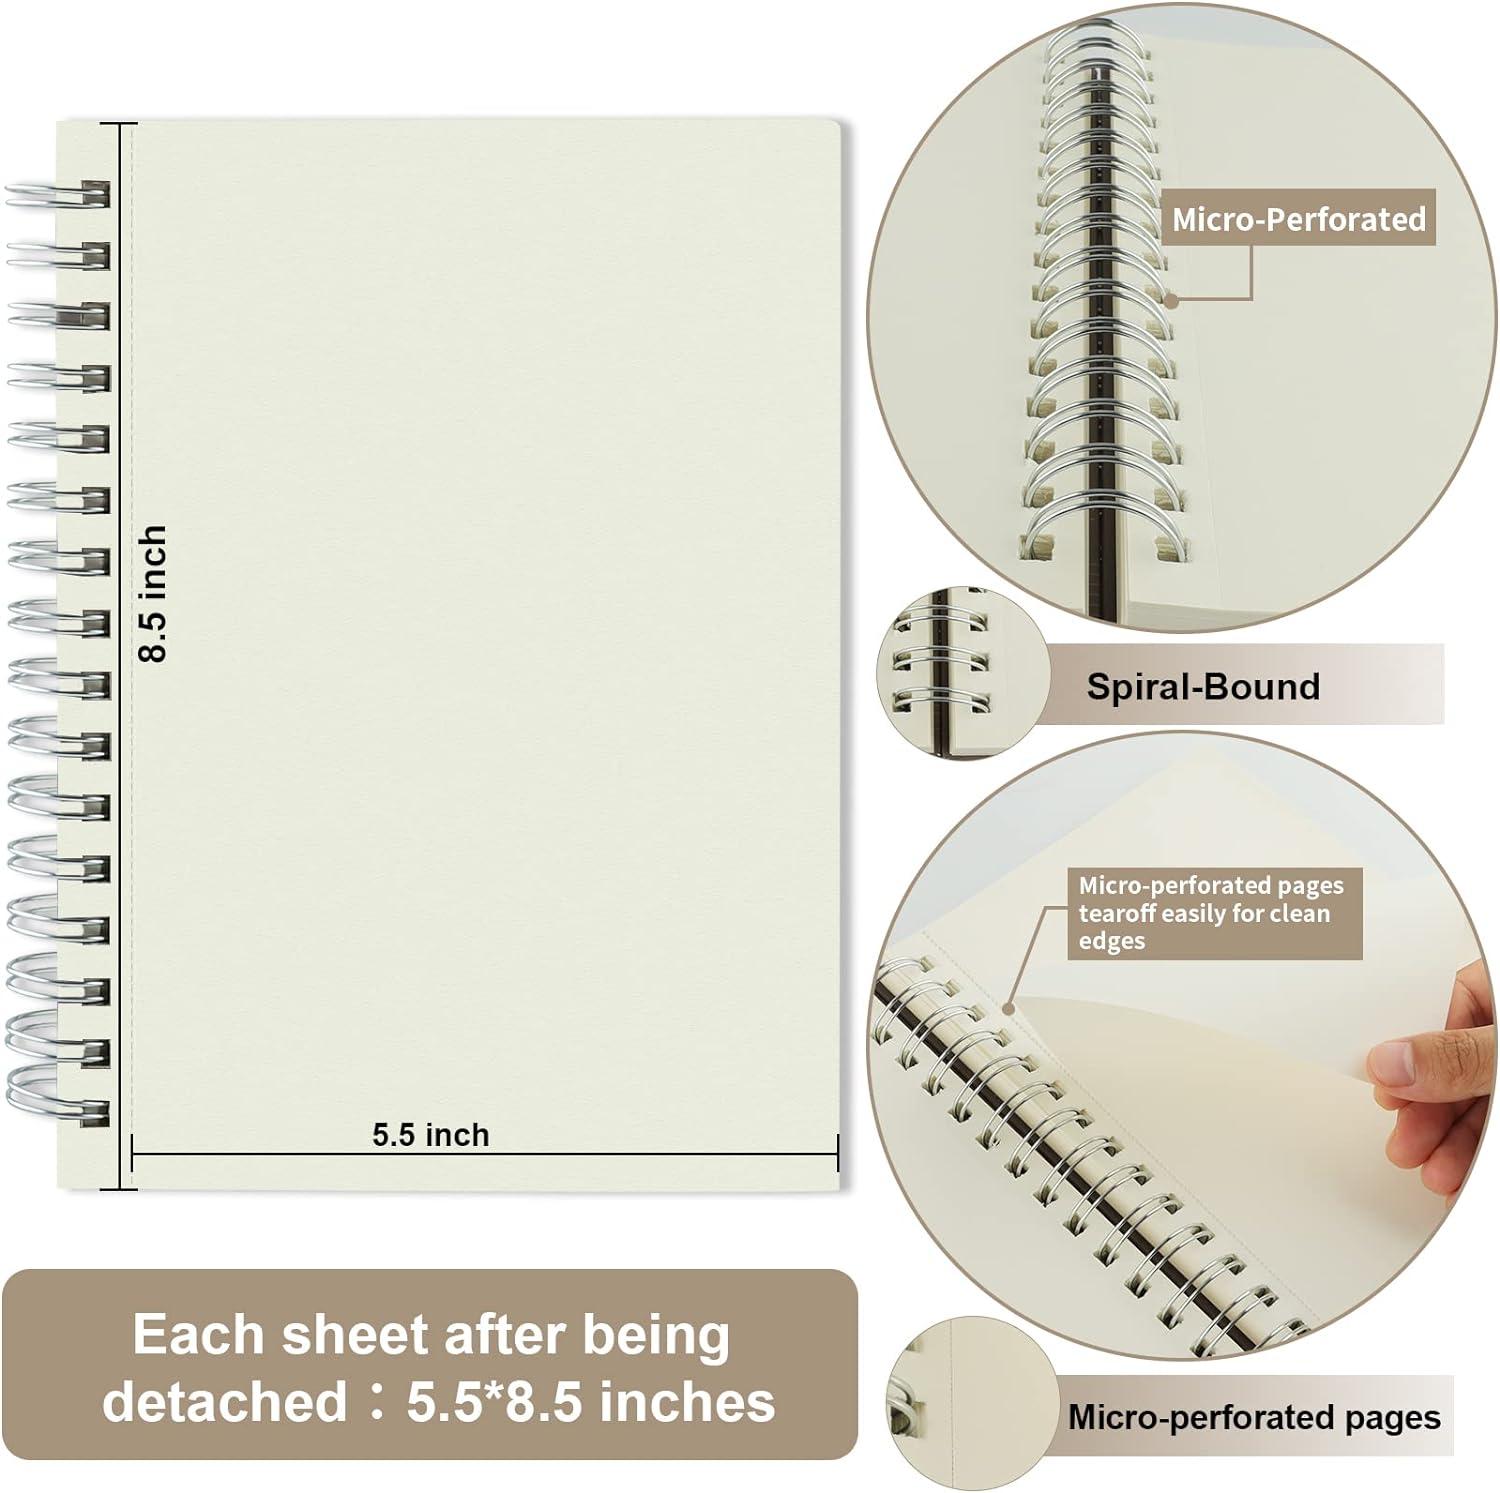 Sketch Book 5.5x8.5 - Small Sketchbook for Drawing - Spiral Bound Art  Sketch Pad, Pack of 2, 200 Sheets (68 lb/100gsm), Acid-Free Drawing Paper  for